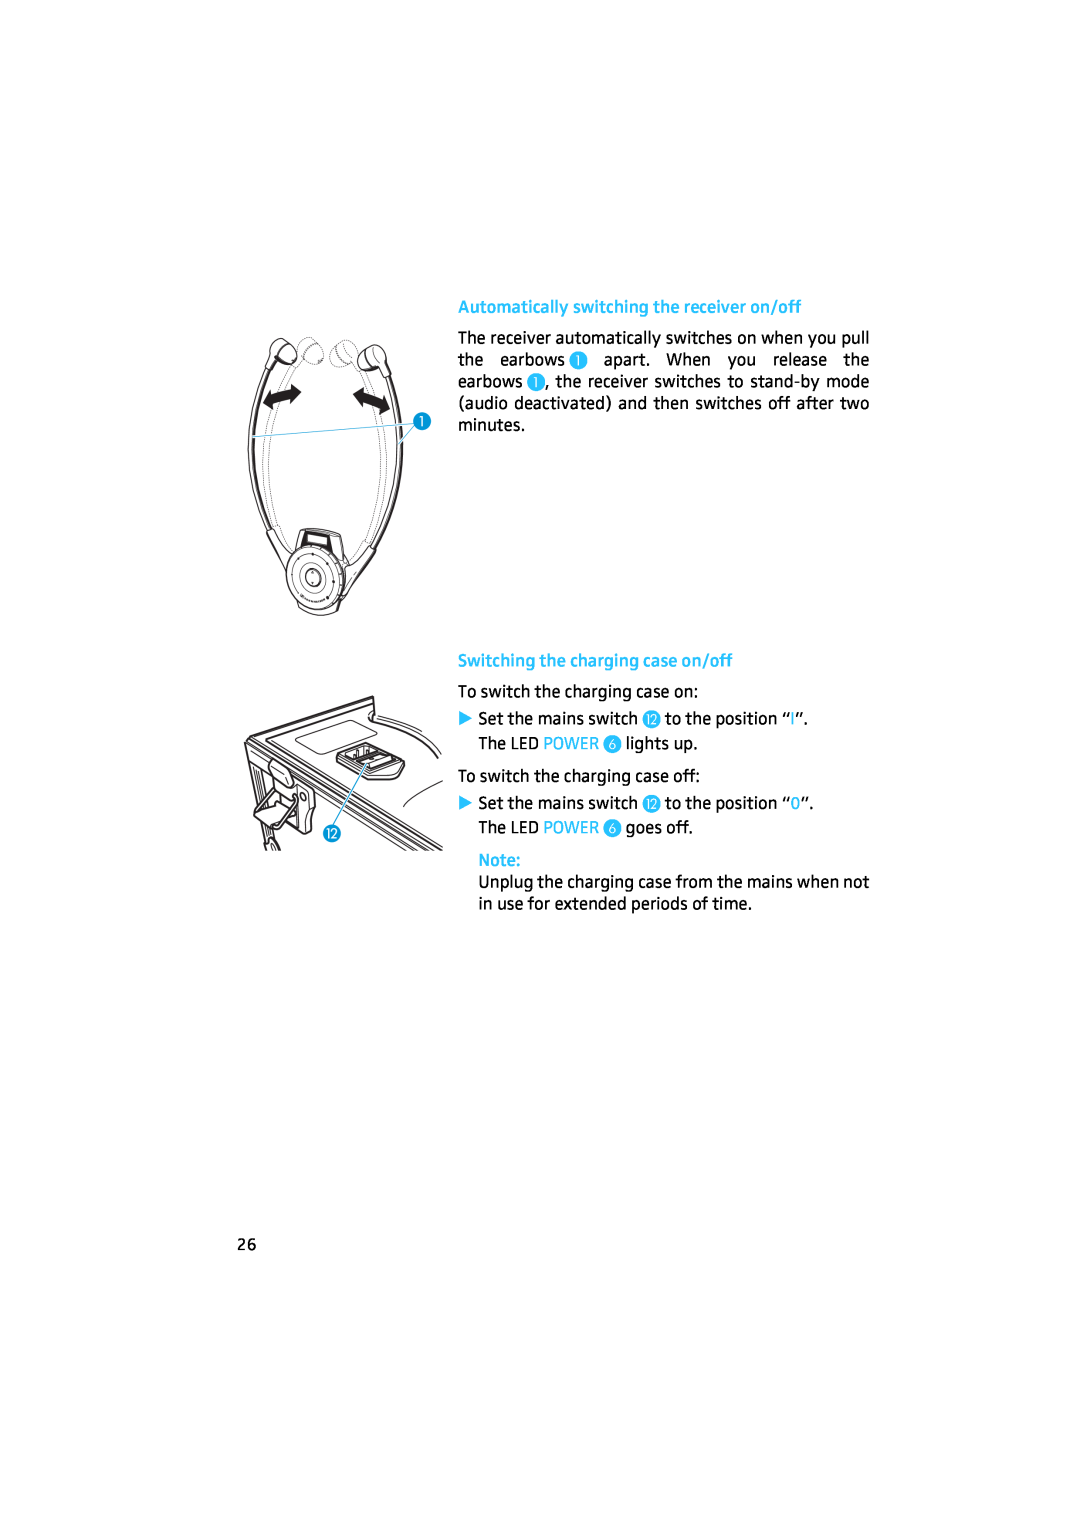 Sennheiser 2020 manual To switch the charging case on 